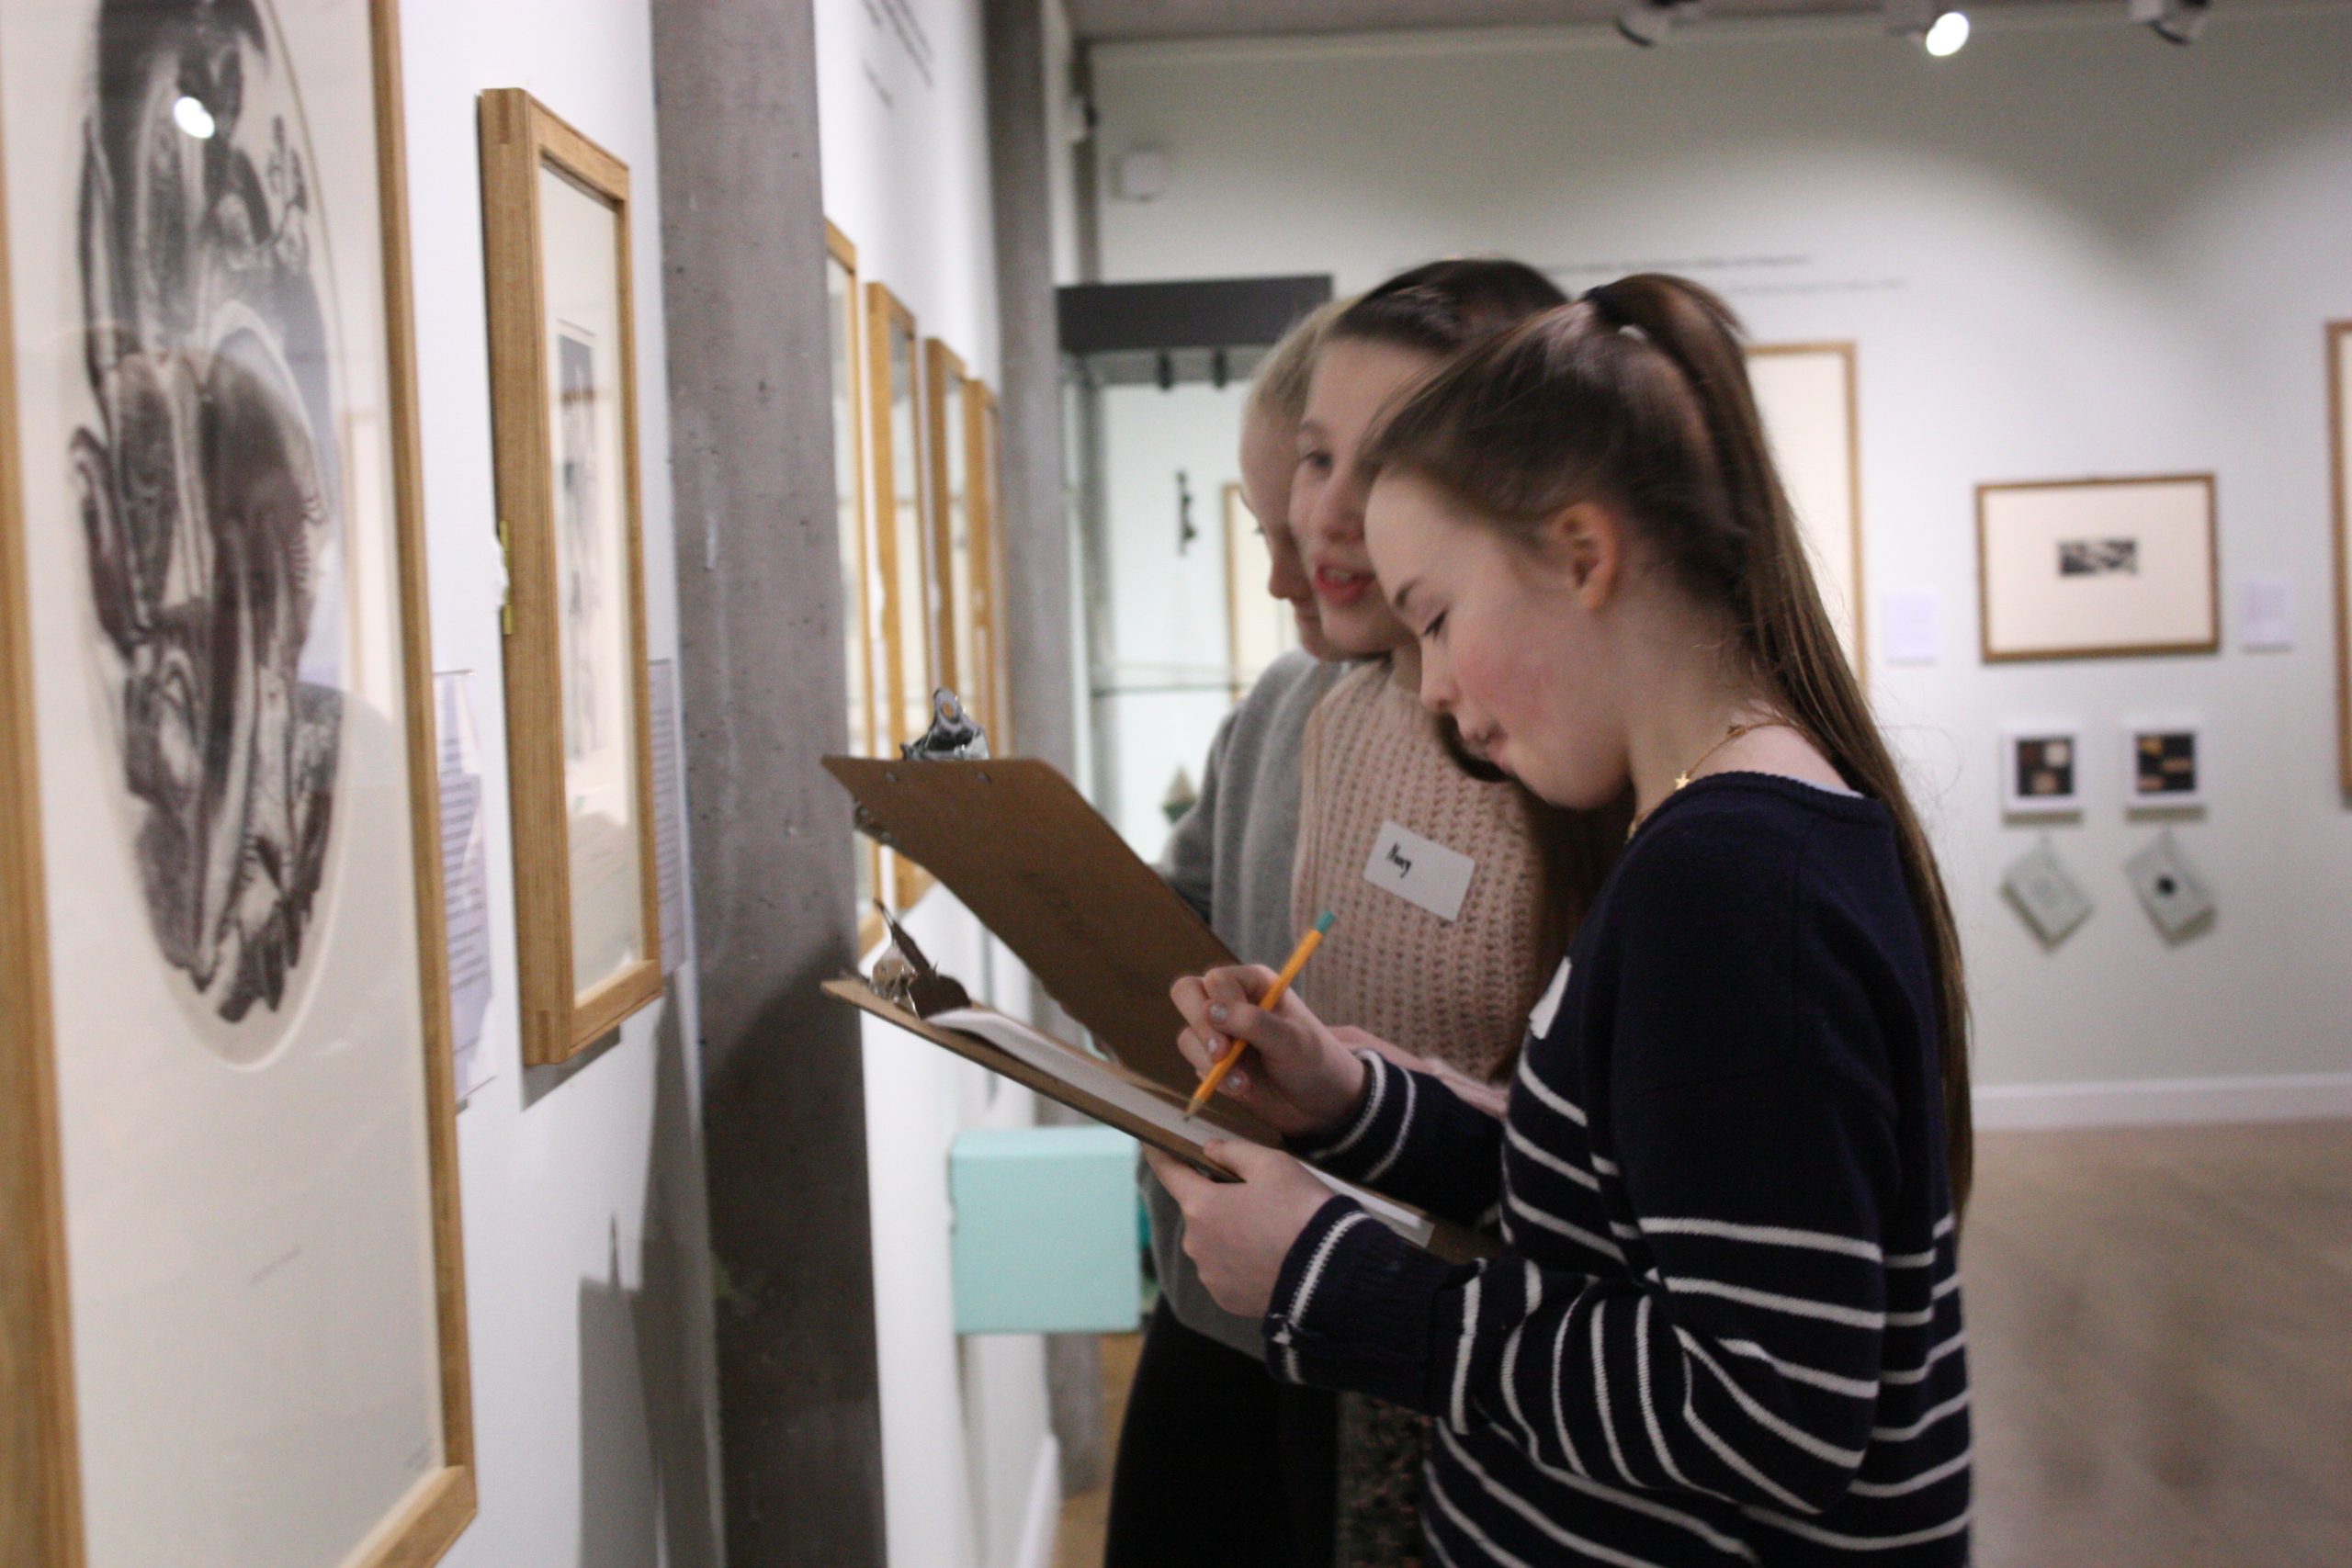 Three teenage girls are drawing from artworks on the gallery wall, using clipboards.